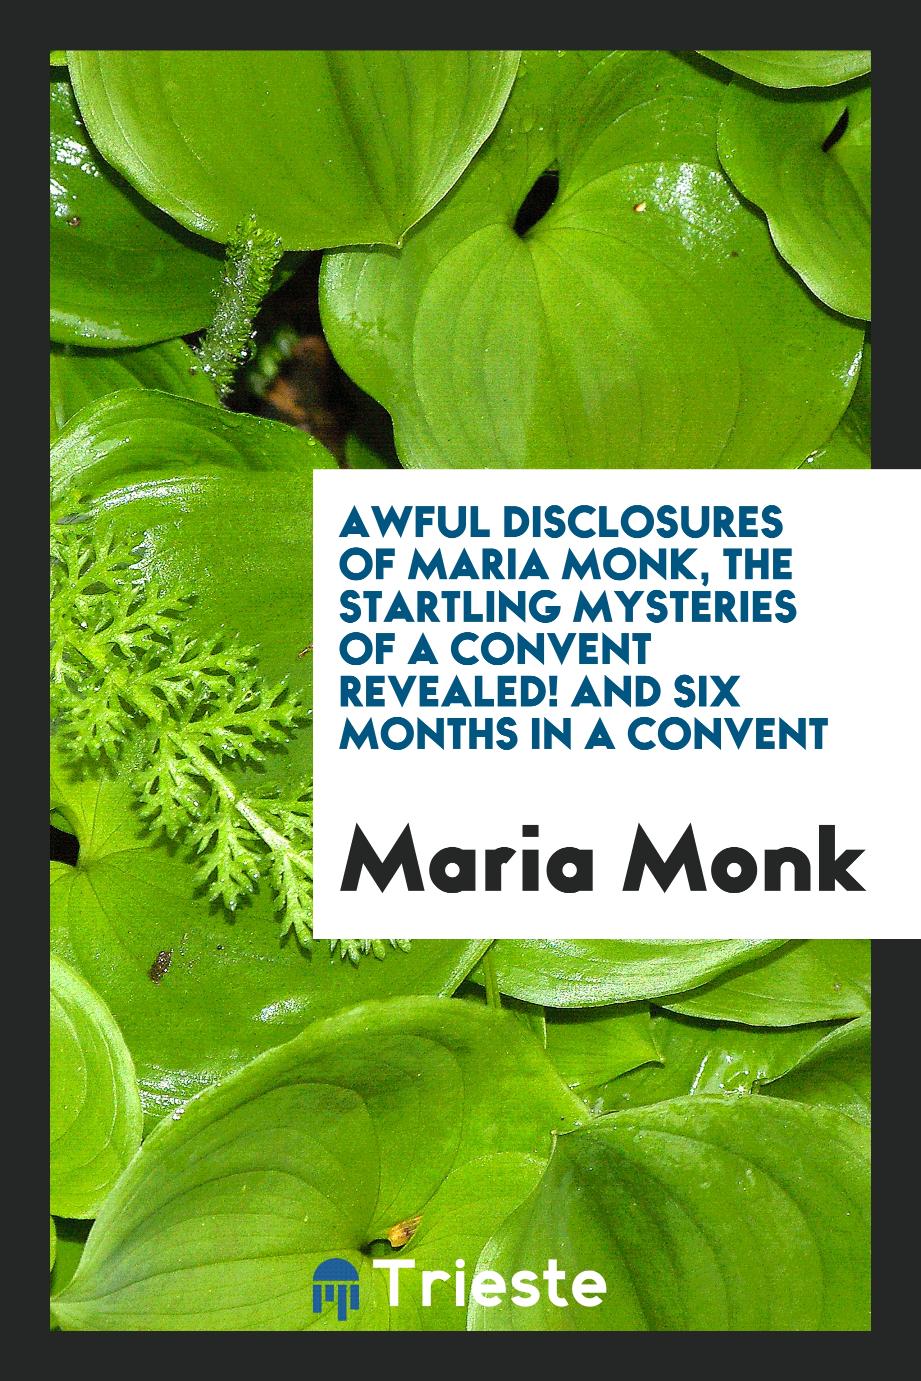 Awful Disclosures of Maria Monk, the Startling Mysteries of a Convent Revealed! And Six Months in a Convent